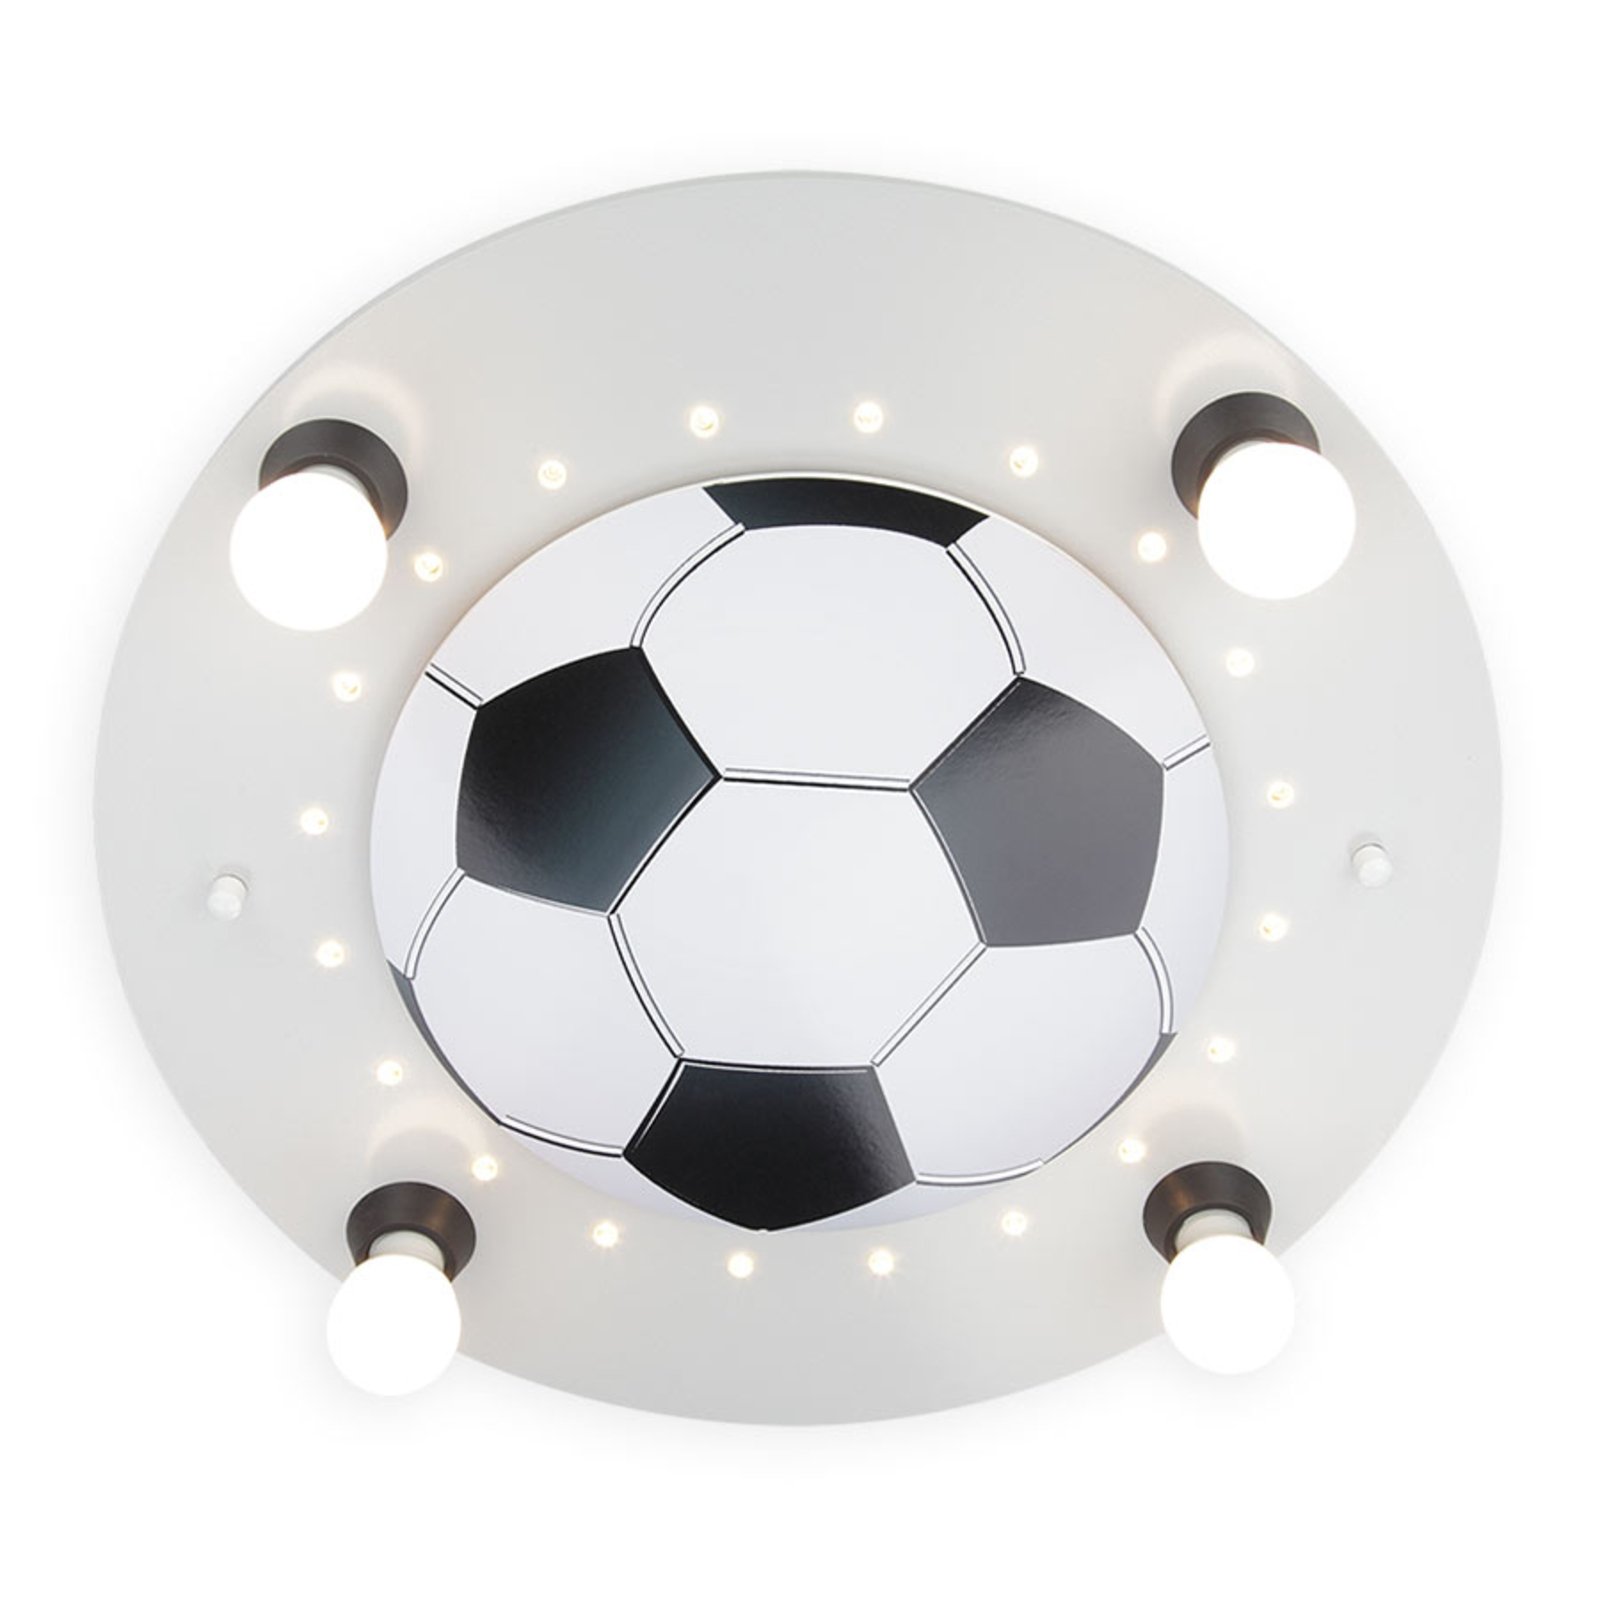 Football ceiling light, 4-bulb, silver and white